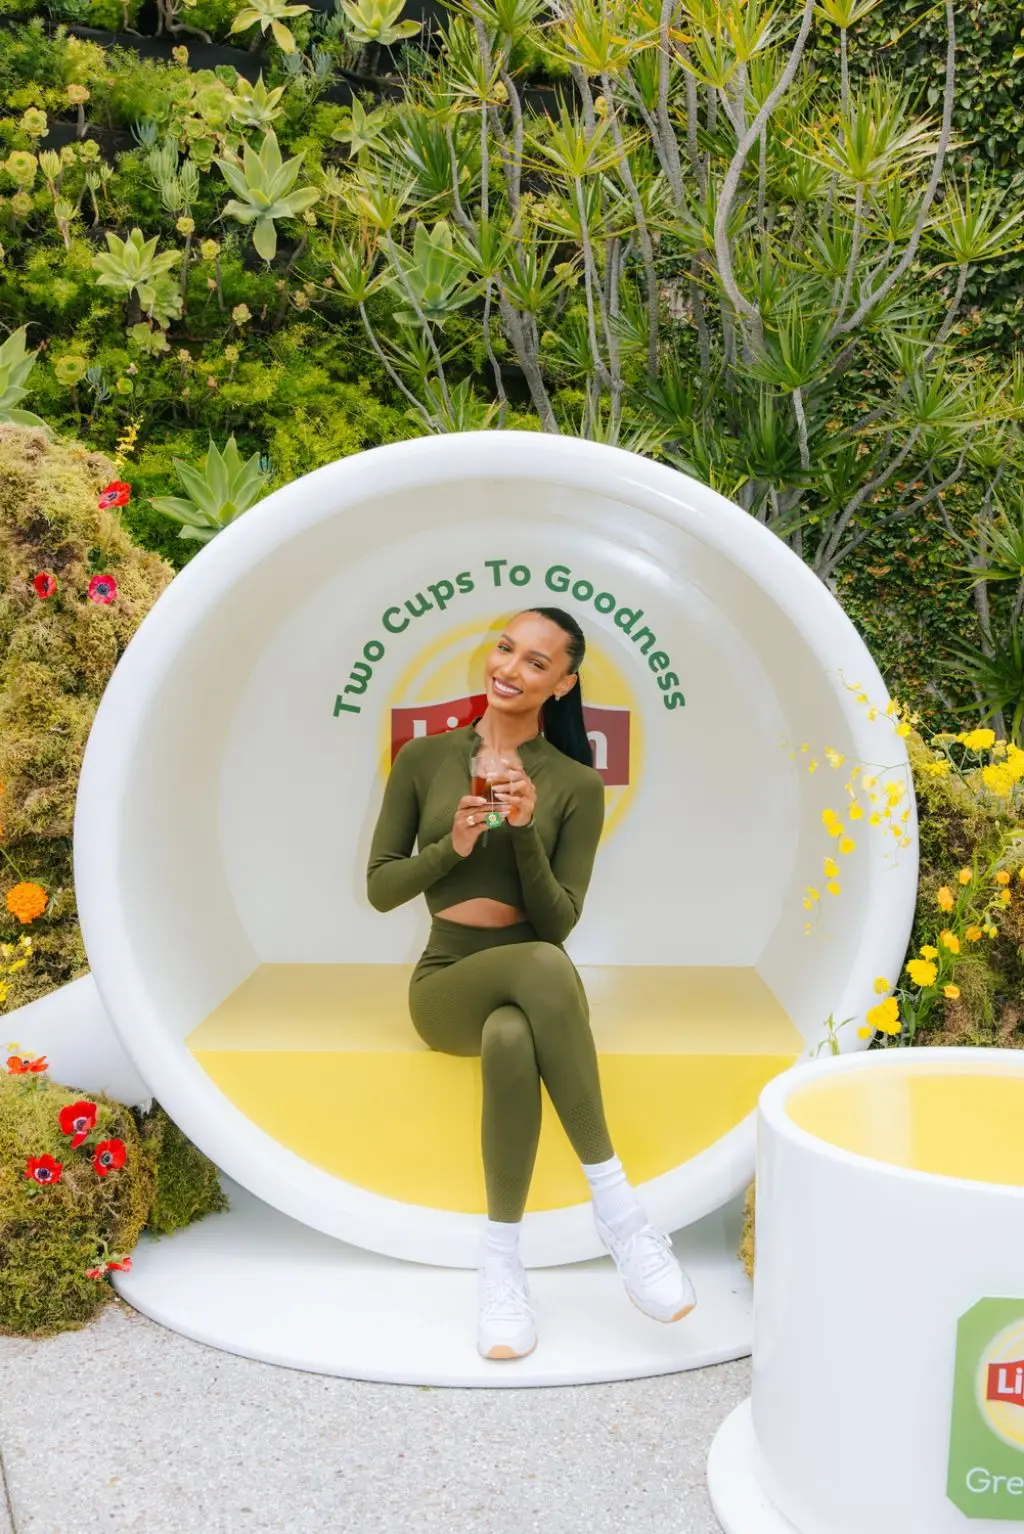 JASMINE TOOKES AT A HIGH TEA LUNCHEON WITH LIPTON GREEN TEA AT THE MAYBOURNE BEVERLY HILLS1